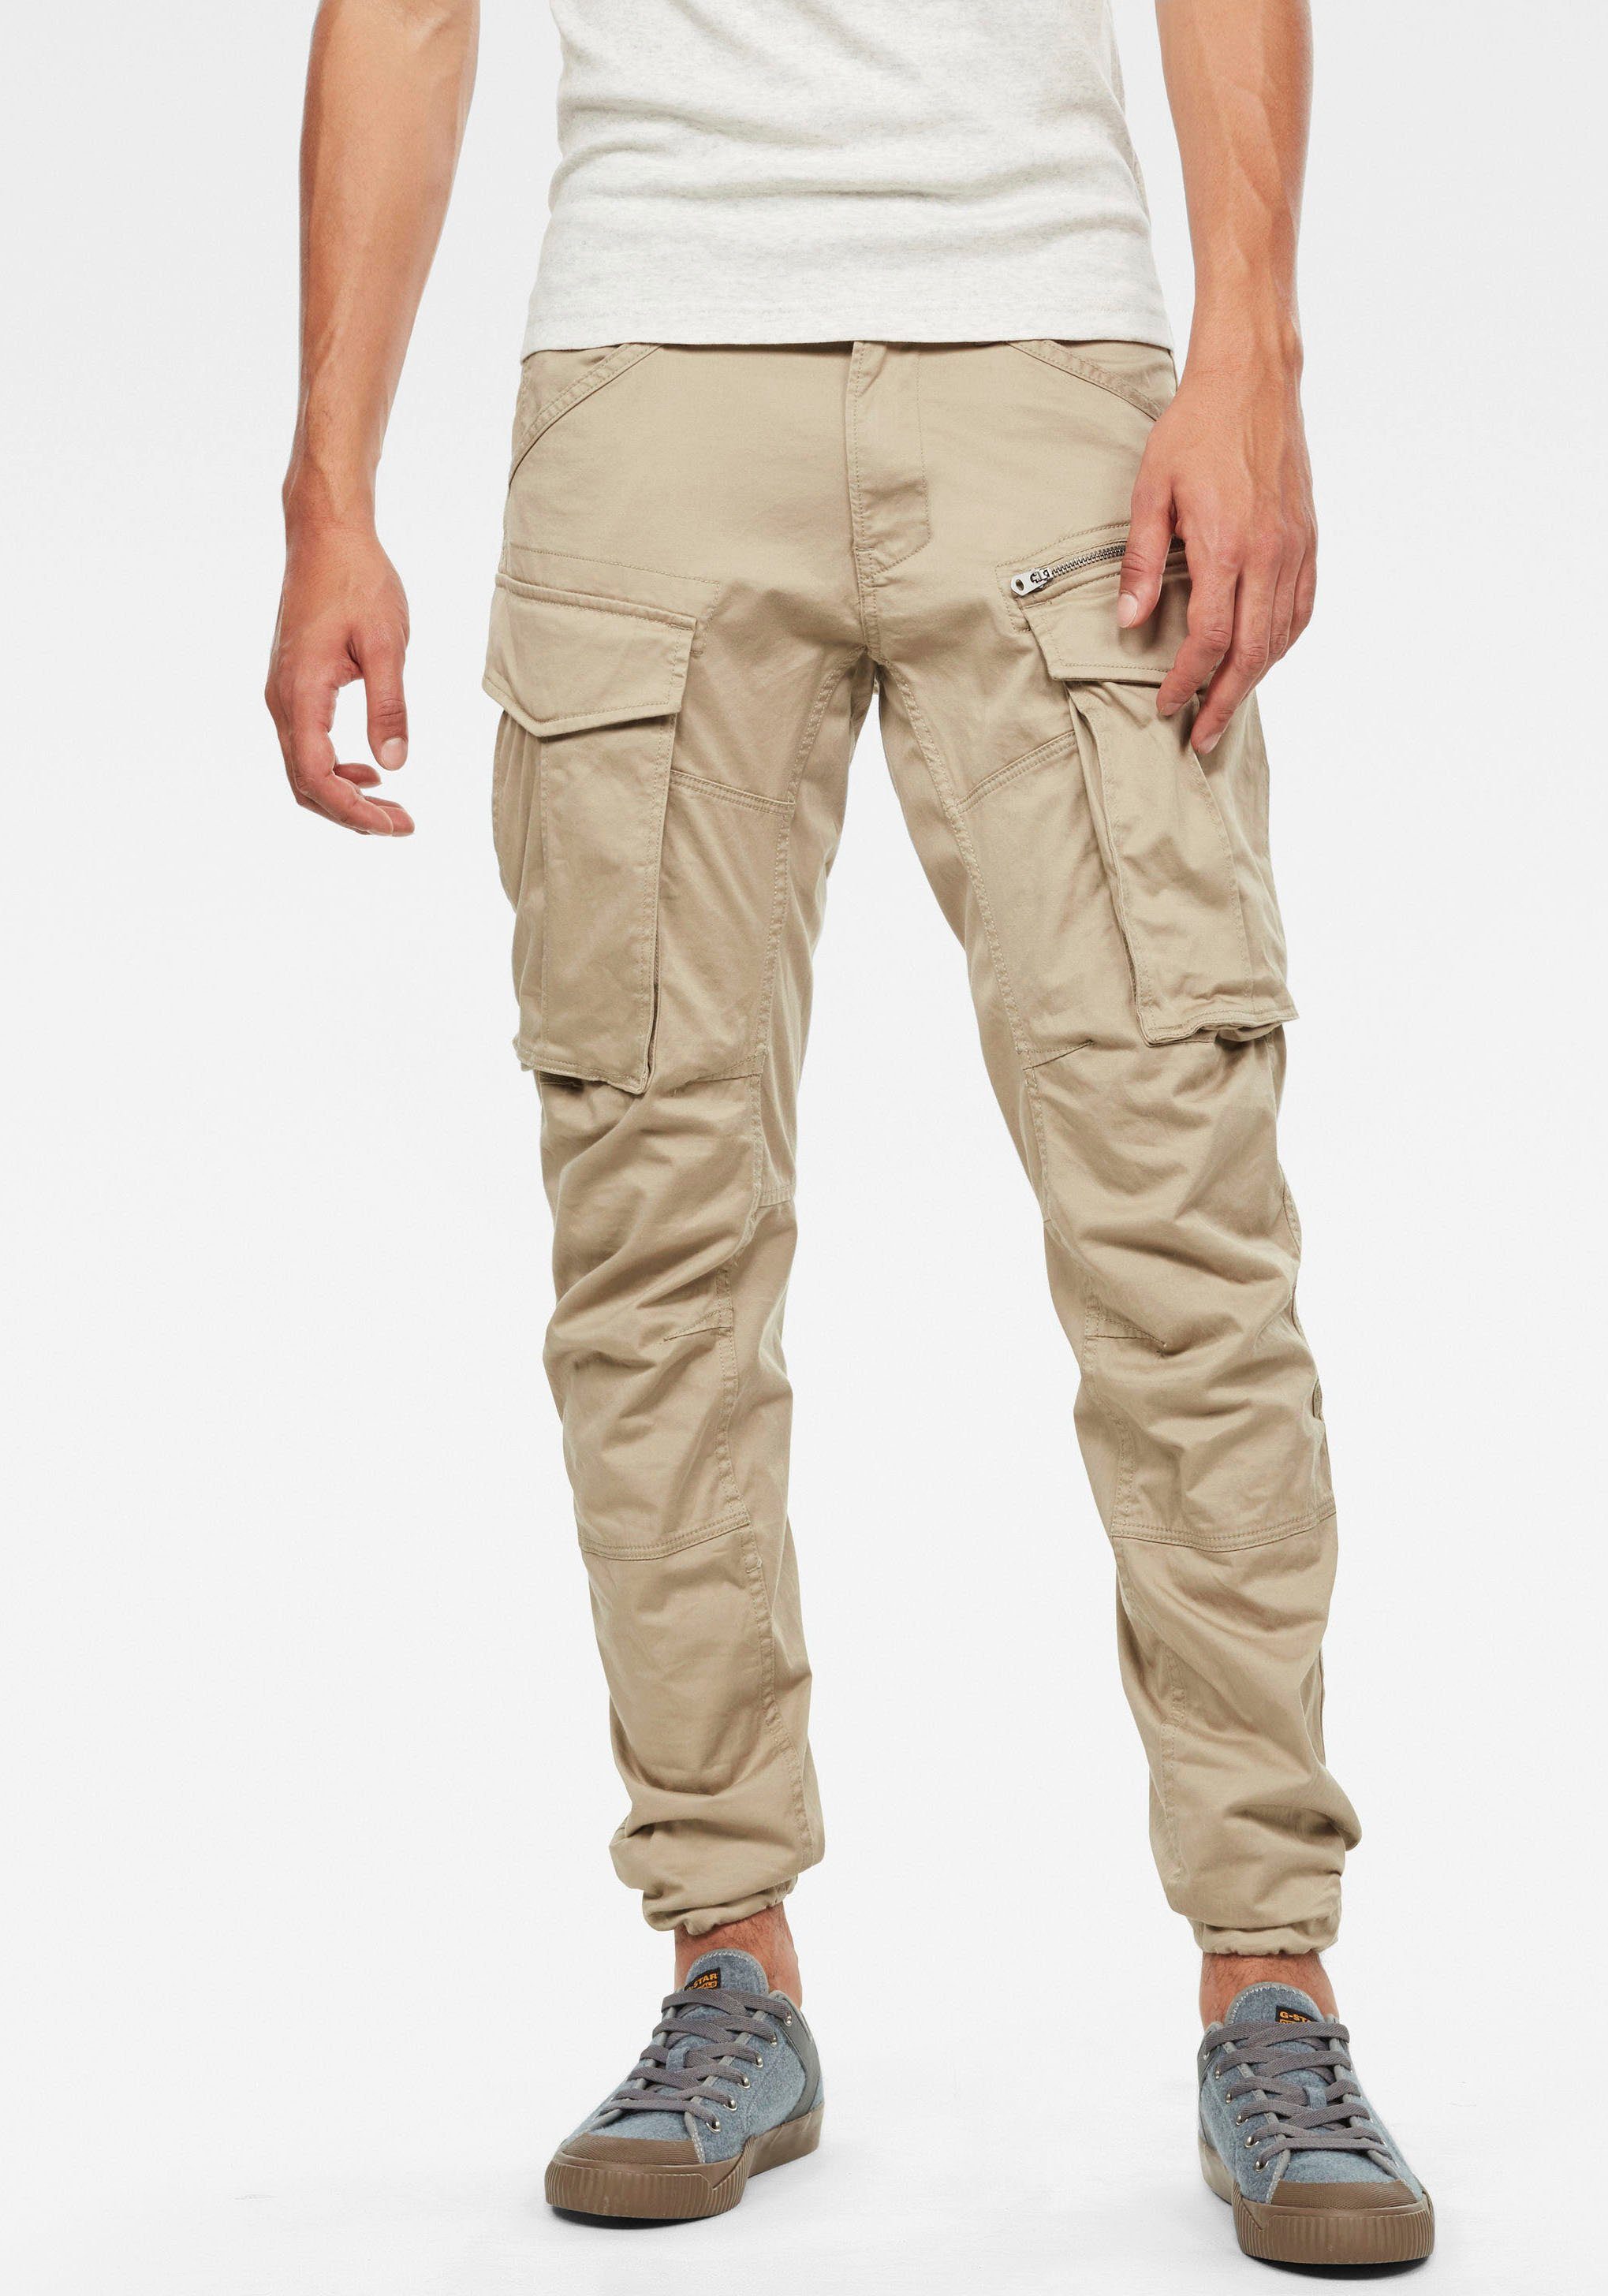 Rovic Cargohose beige G-Star Zip RAW Tapered Pant 3D